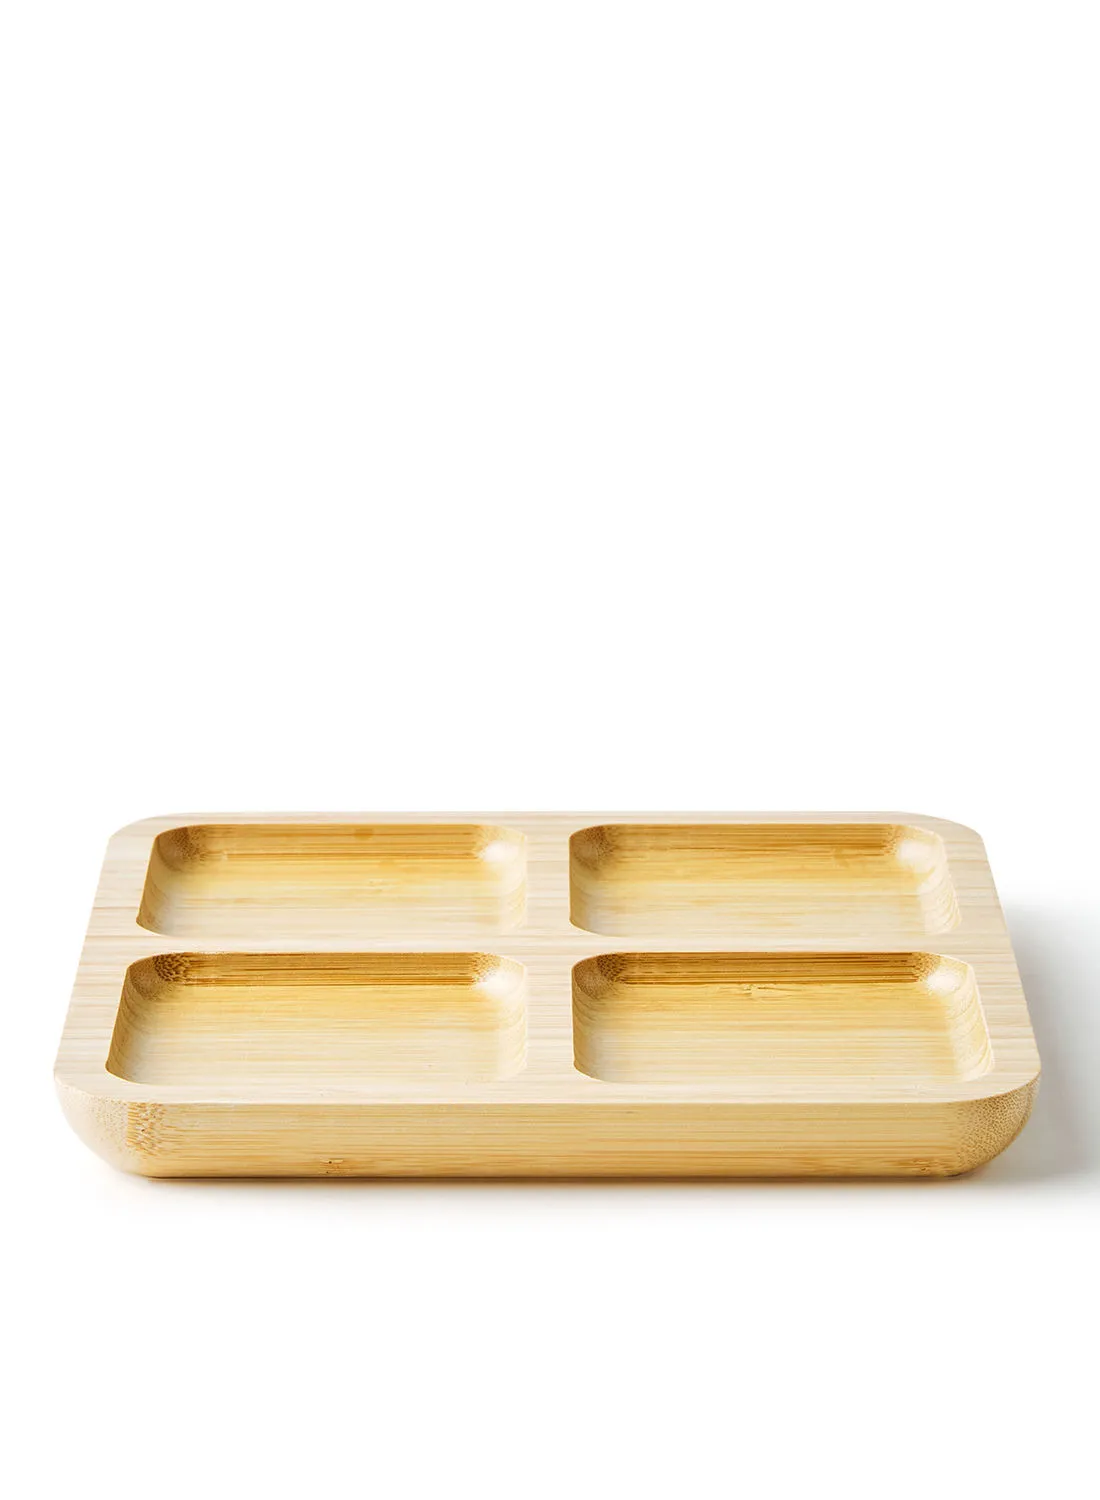 noon east Serving Platter - Made Of Bamboo - Square (Small) - Serving Plate - Serving Dishes - Tray - Brown